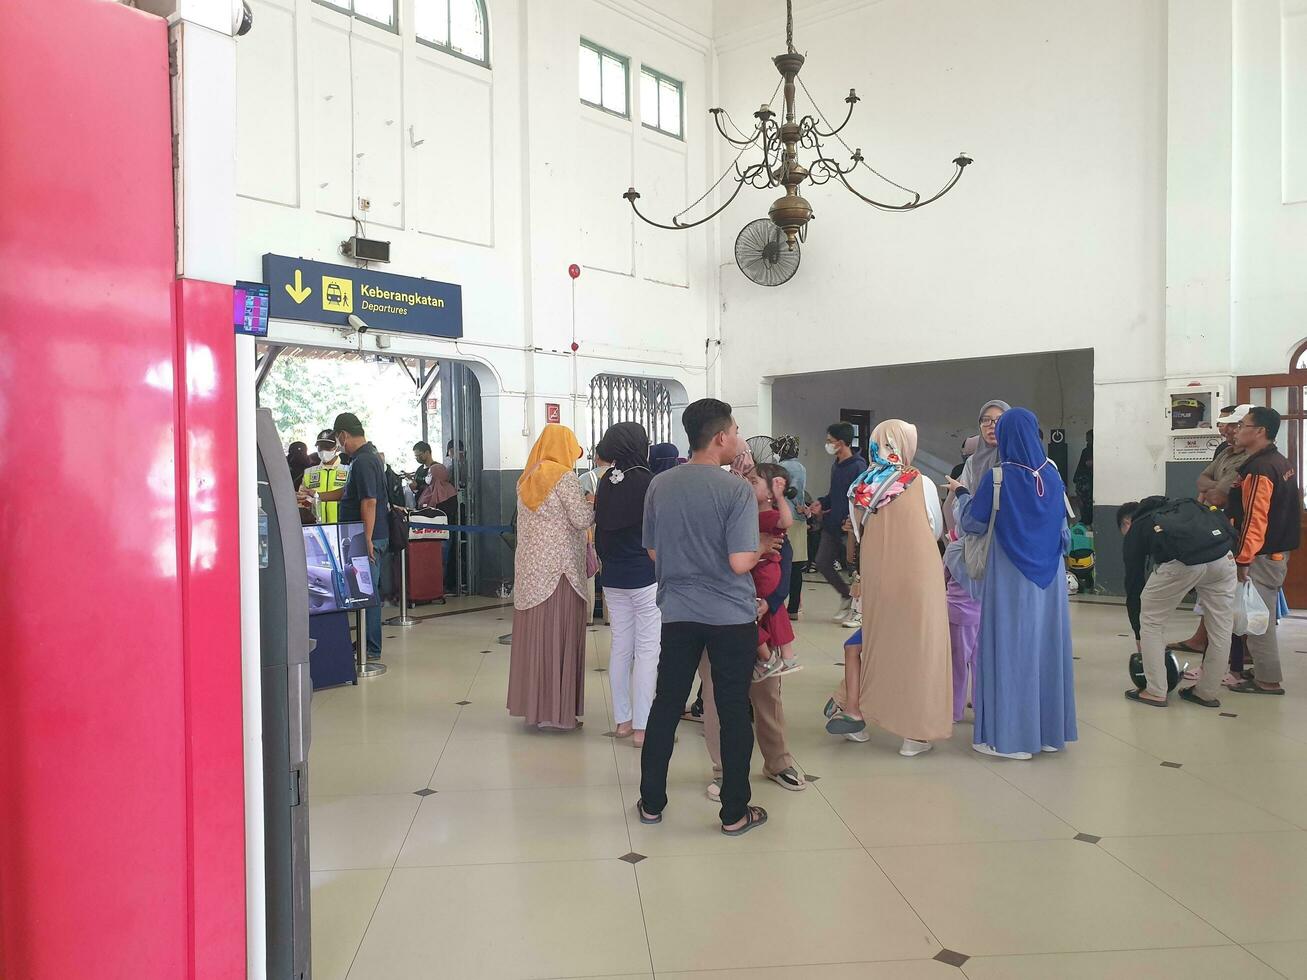 Tegal, May 2023. The atmosphere at Tegal train station was full of people queuing to check their tickets to get into the train carriages in the morning. photo